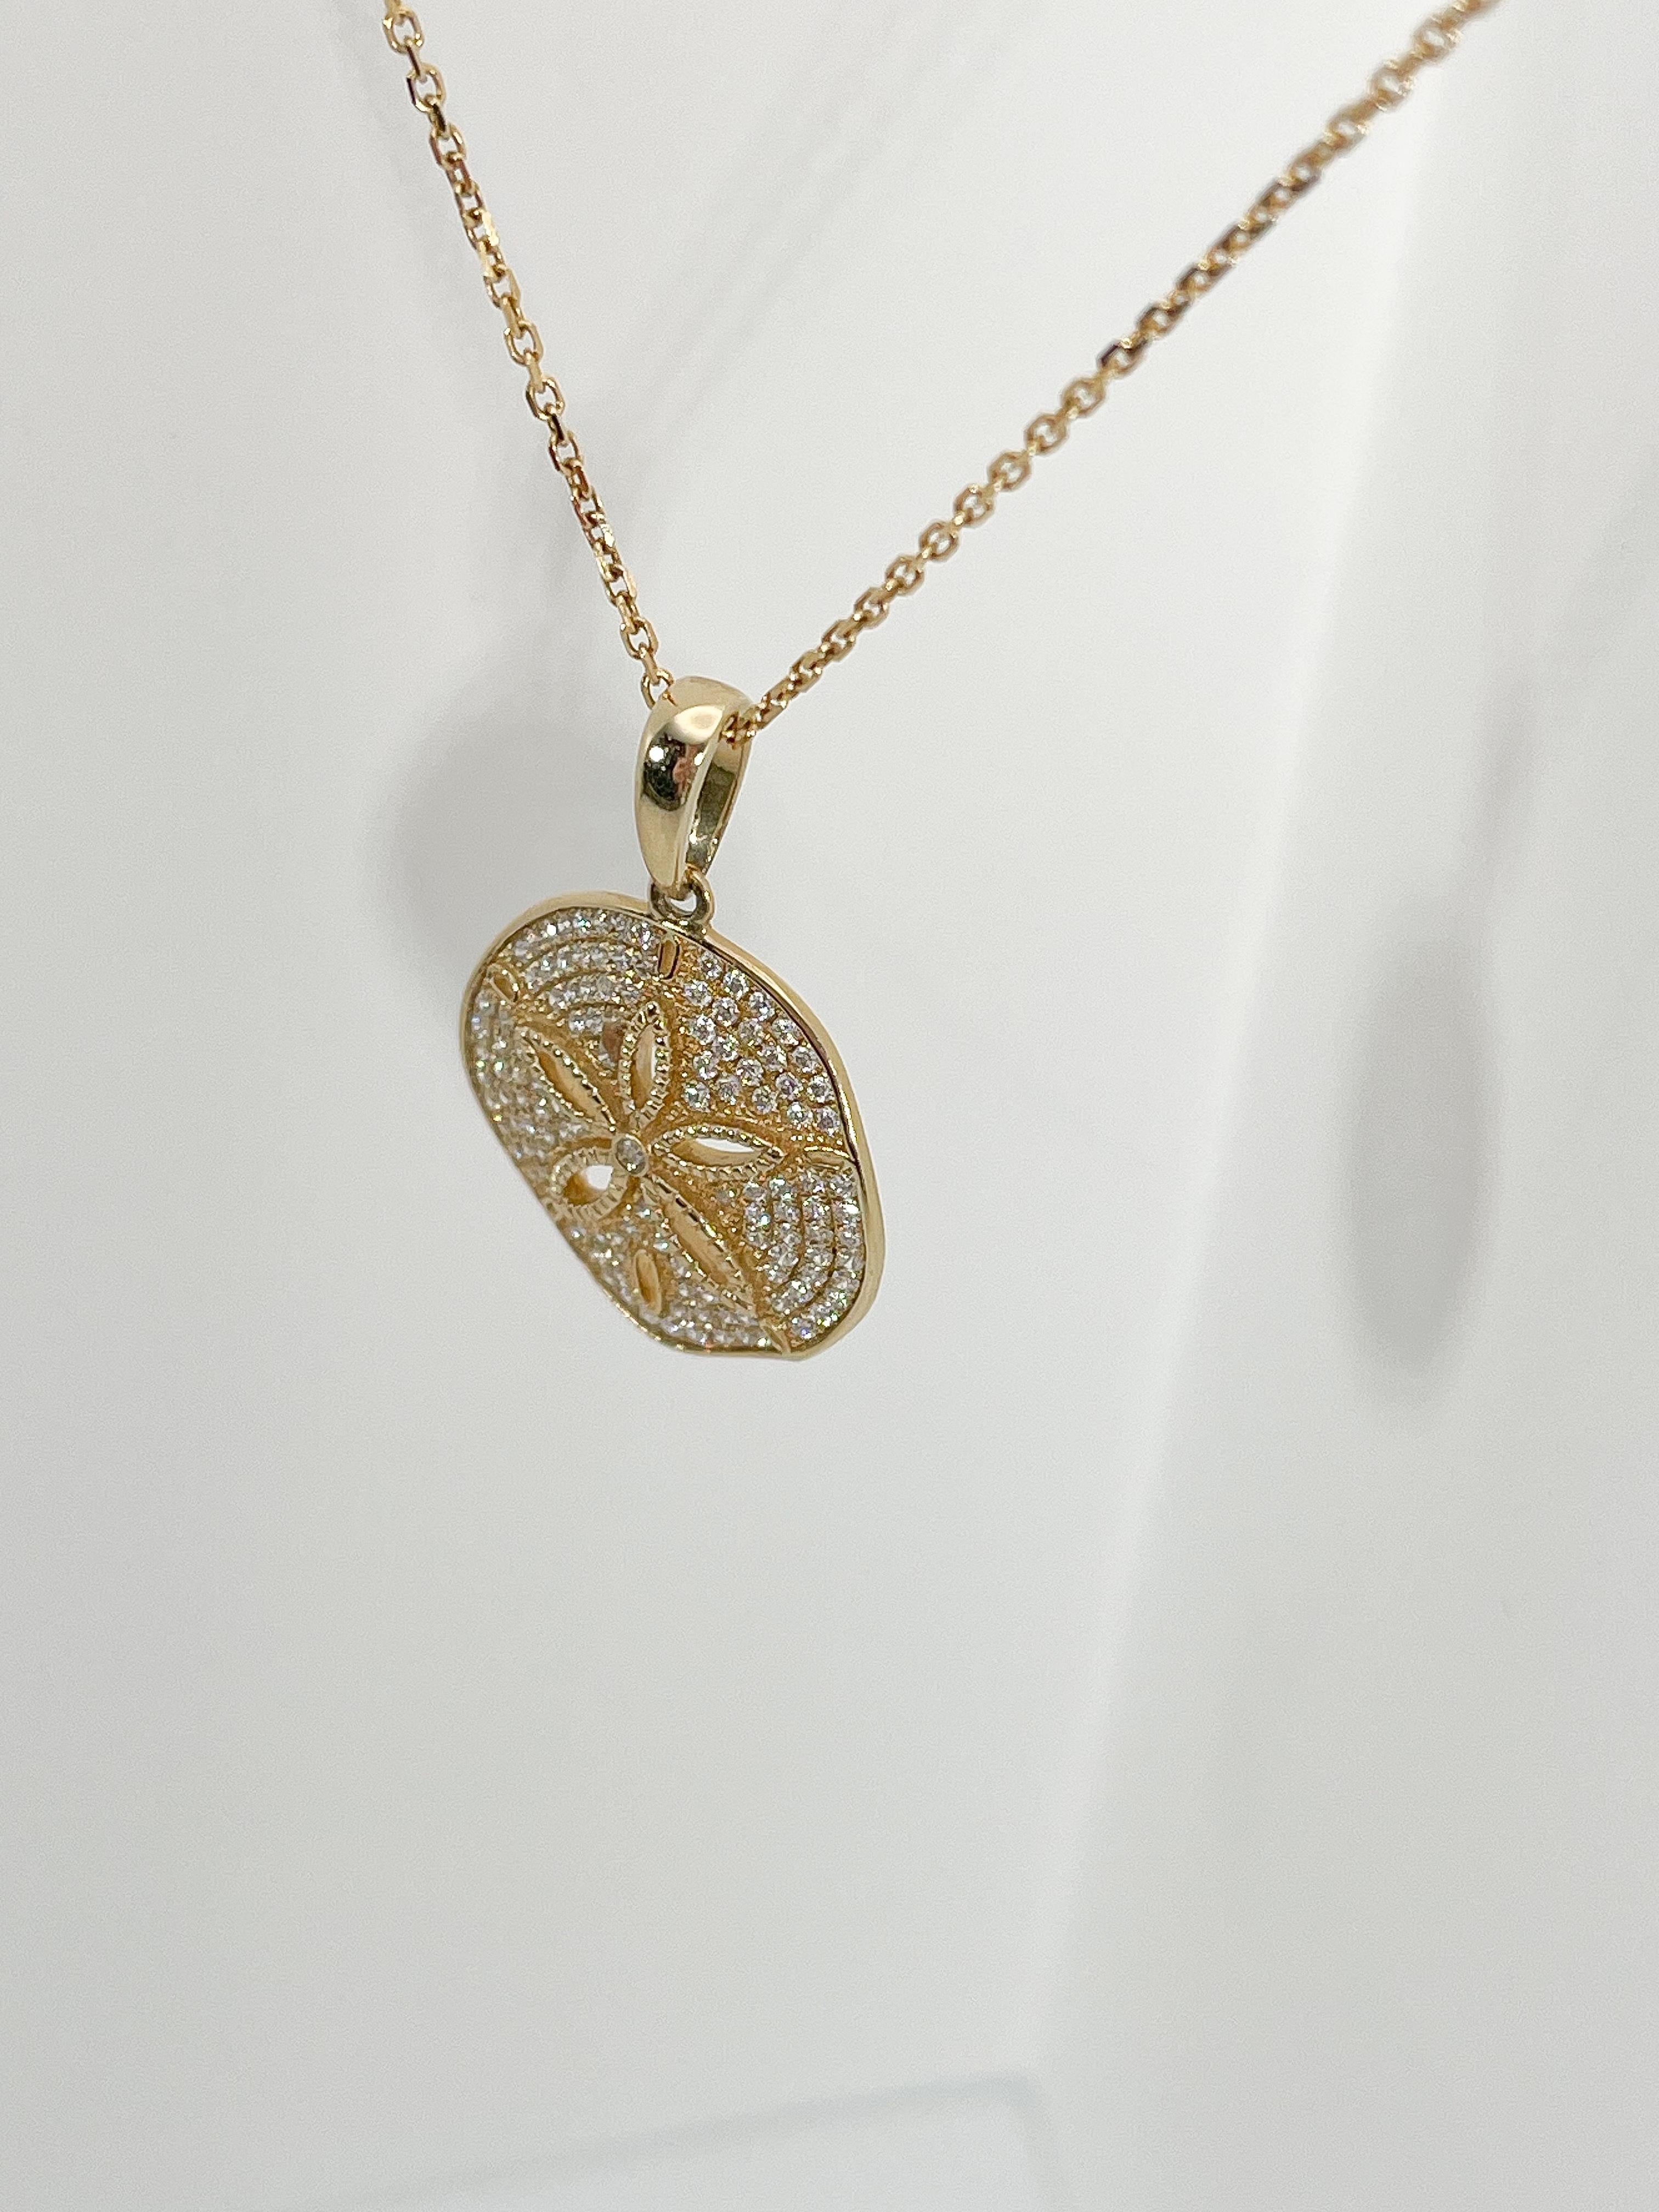 14K Yellow Gold Diamond Sand Dollar Pendant Necklace In Good Condition For Sale In Stuart, FL